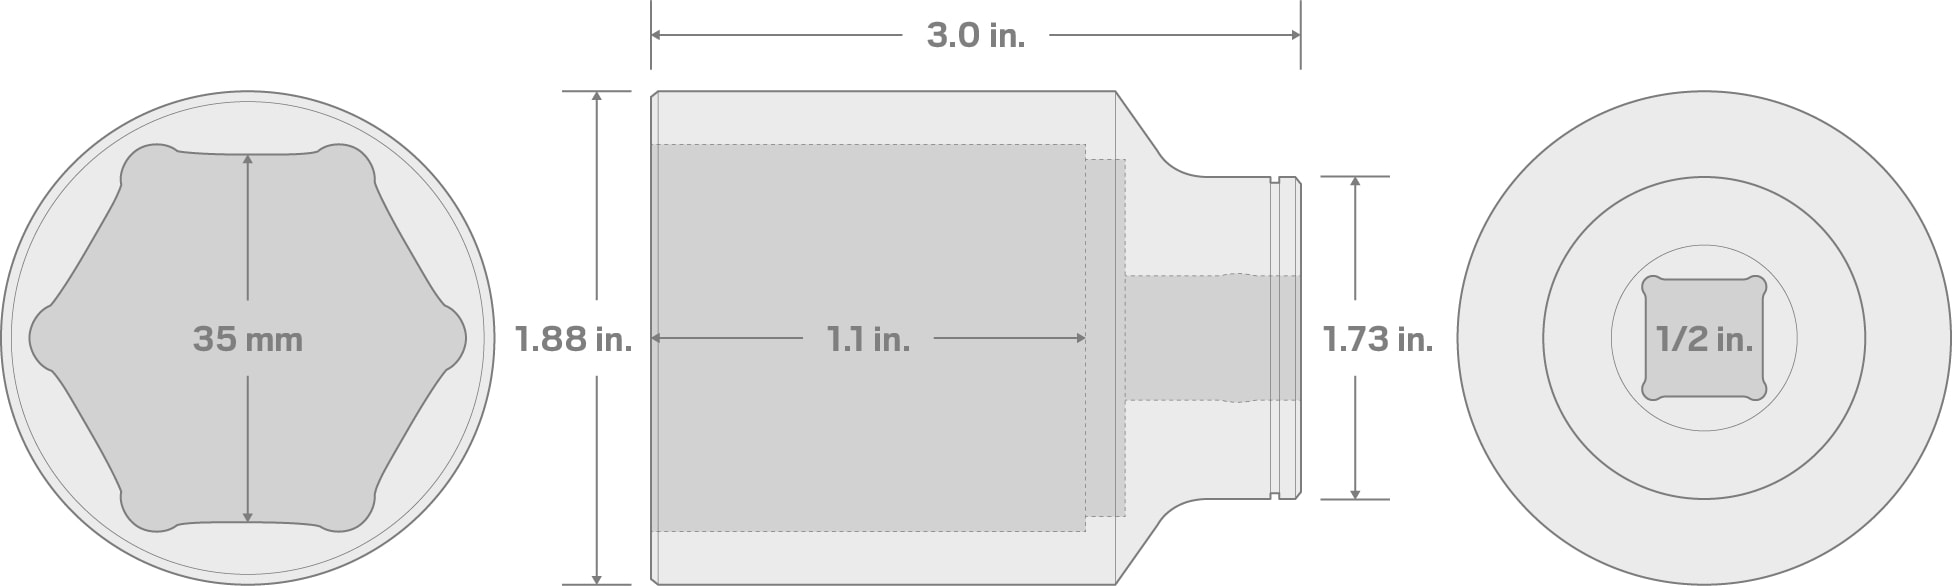 Specs for 1/2 Inch Drive x 35 mm Deep 6-Point Socket